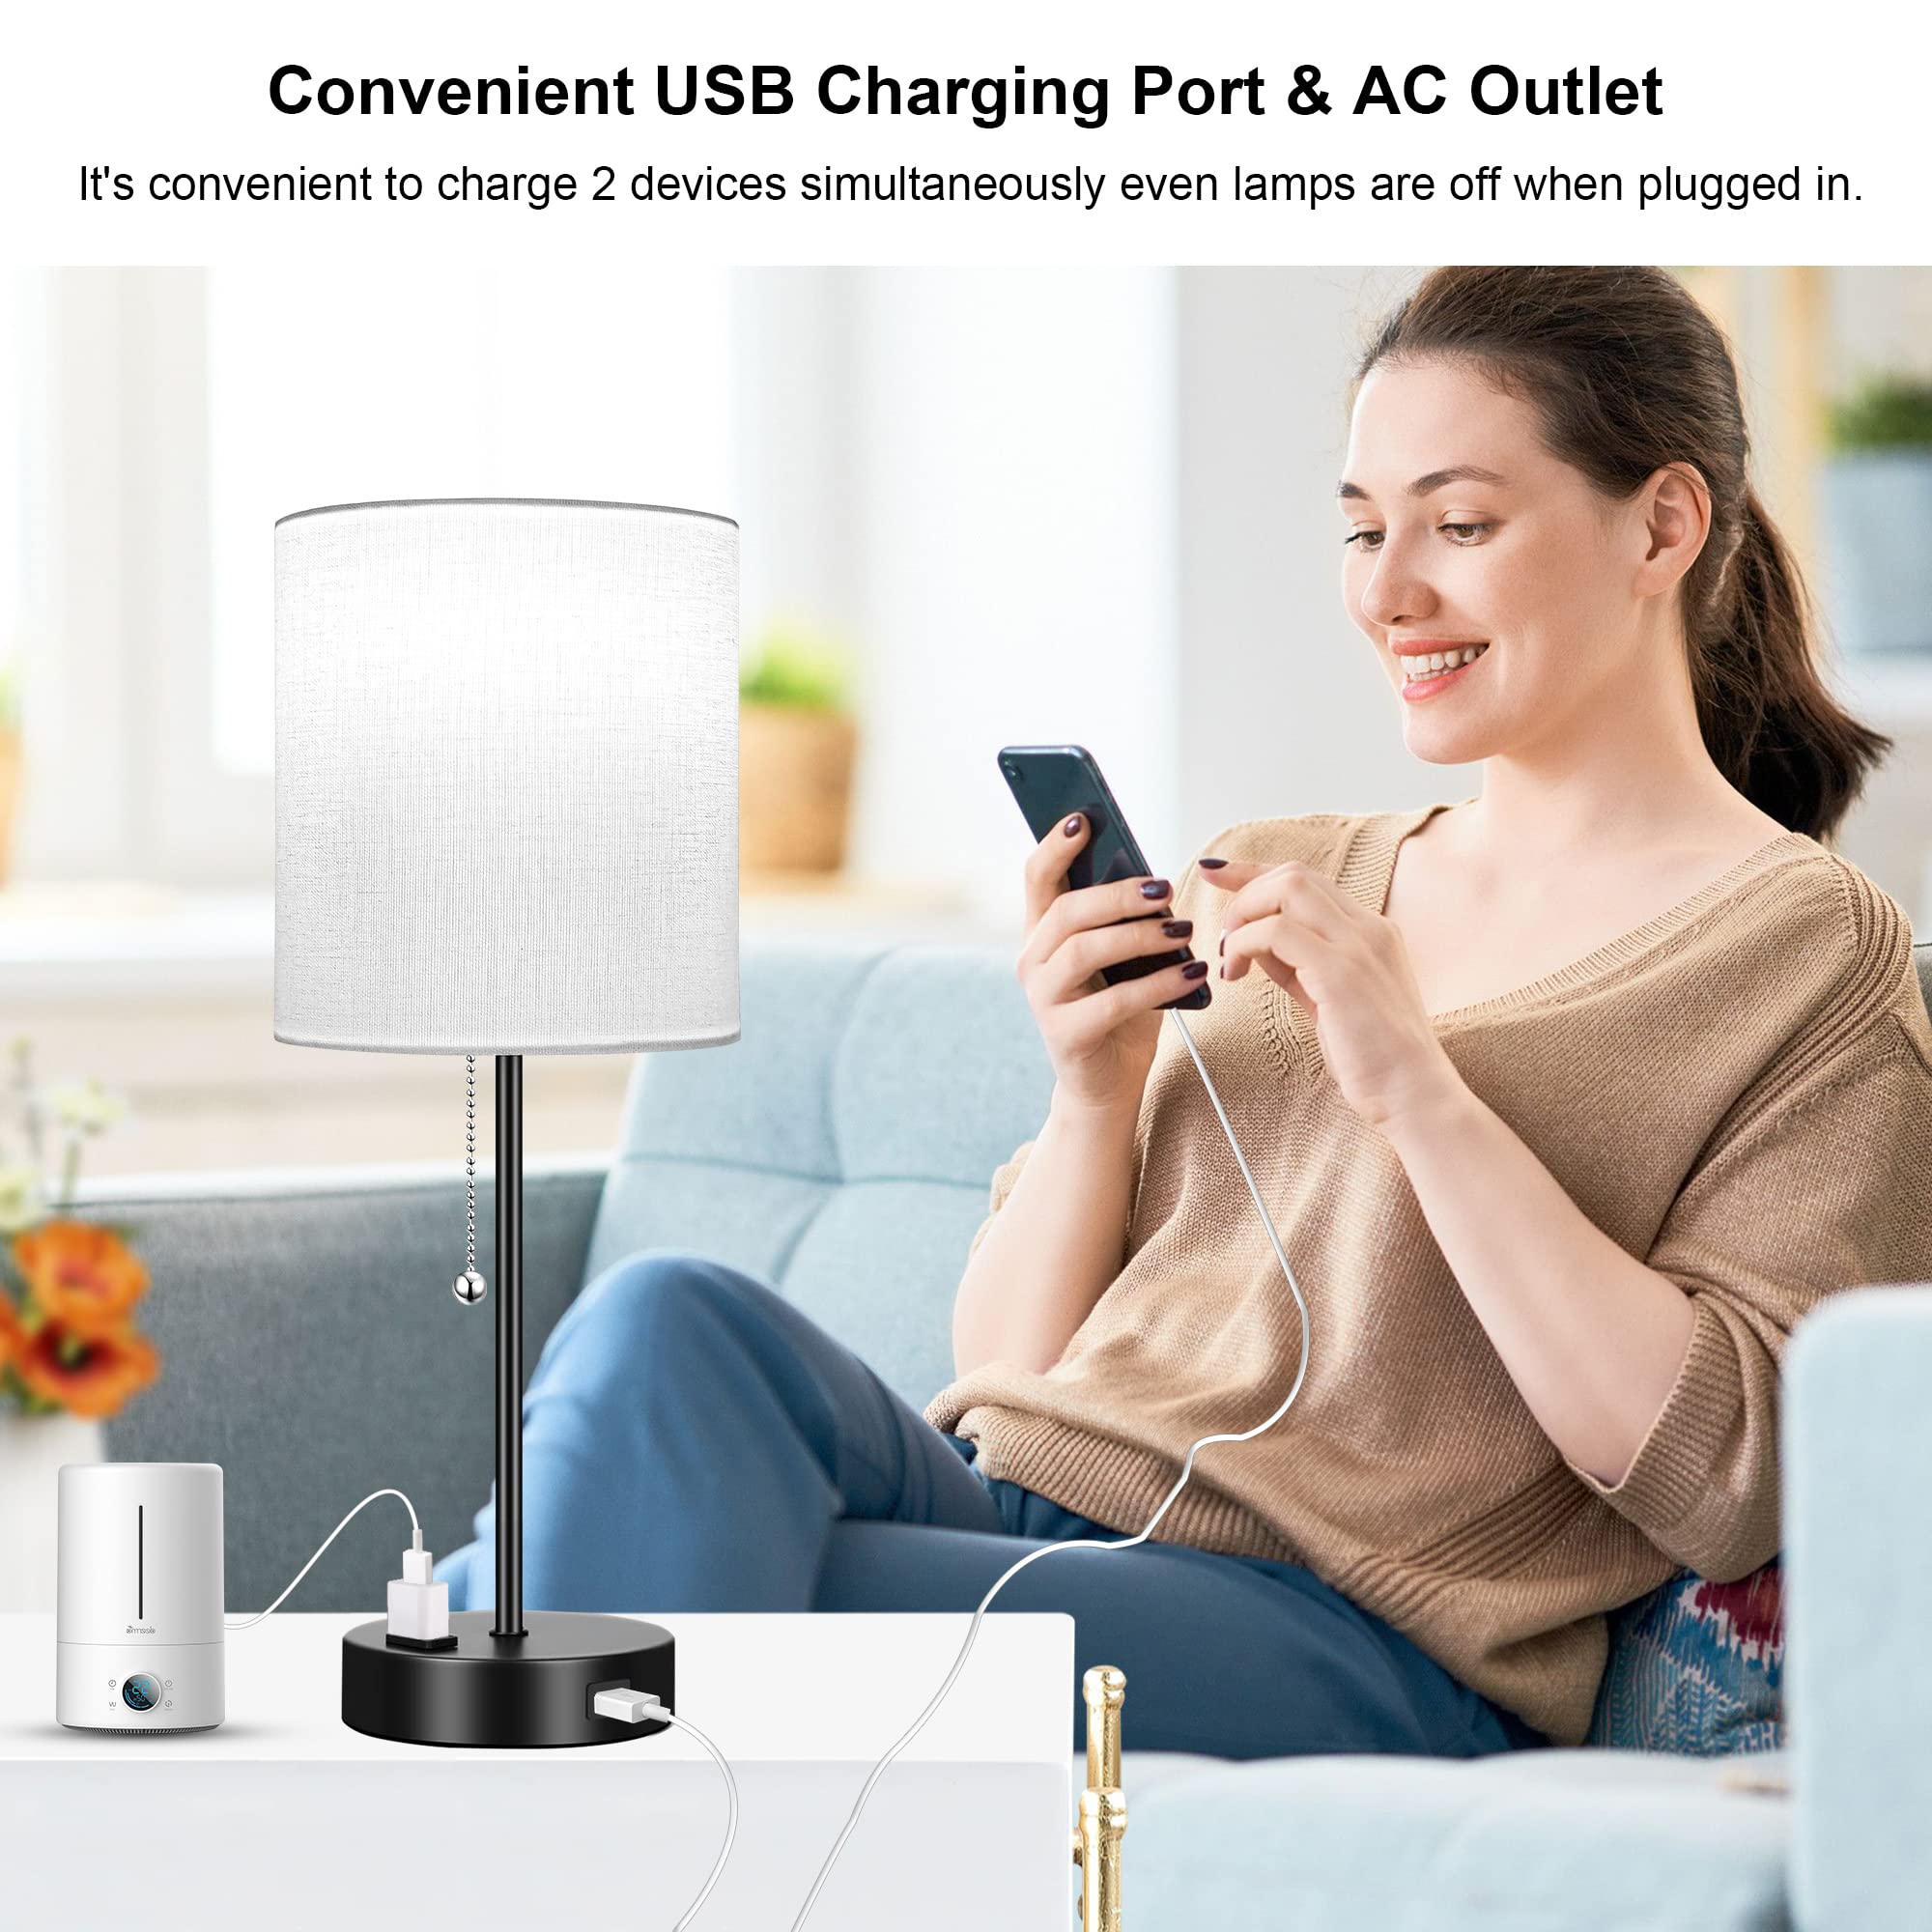 3 Color Temperature Bedside Table Lamps Set of 2, Modern Small Lamp with USB and Outlet, Bedroom Lamp for Nightstand with Chain Switch, White Desk Lamp for Living Room, Two Bulbs Included